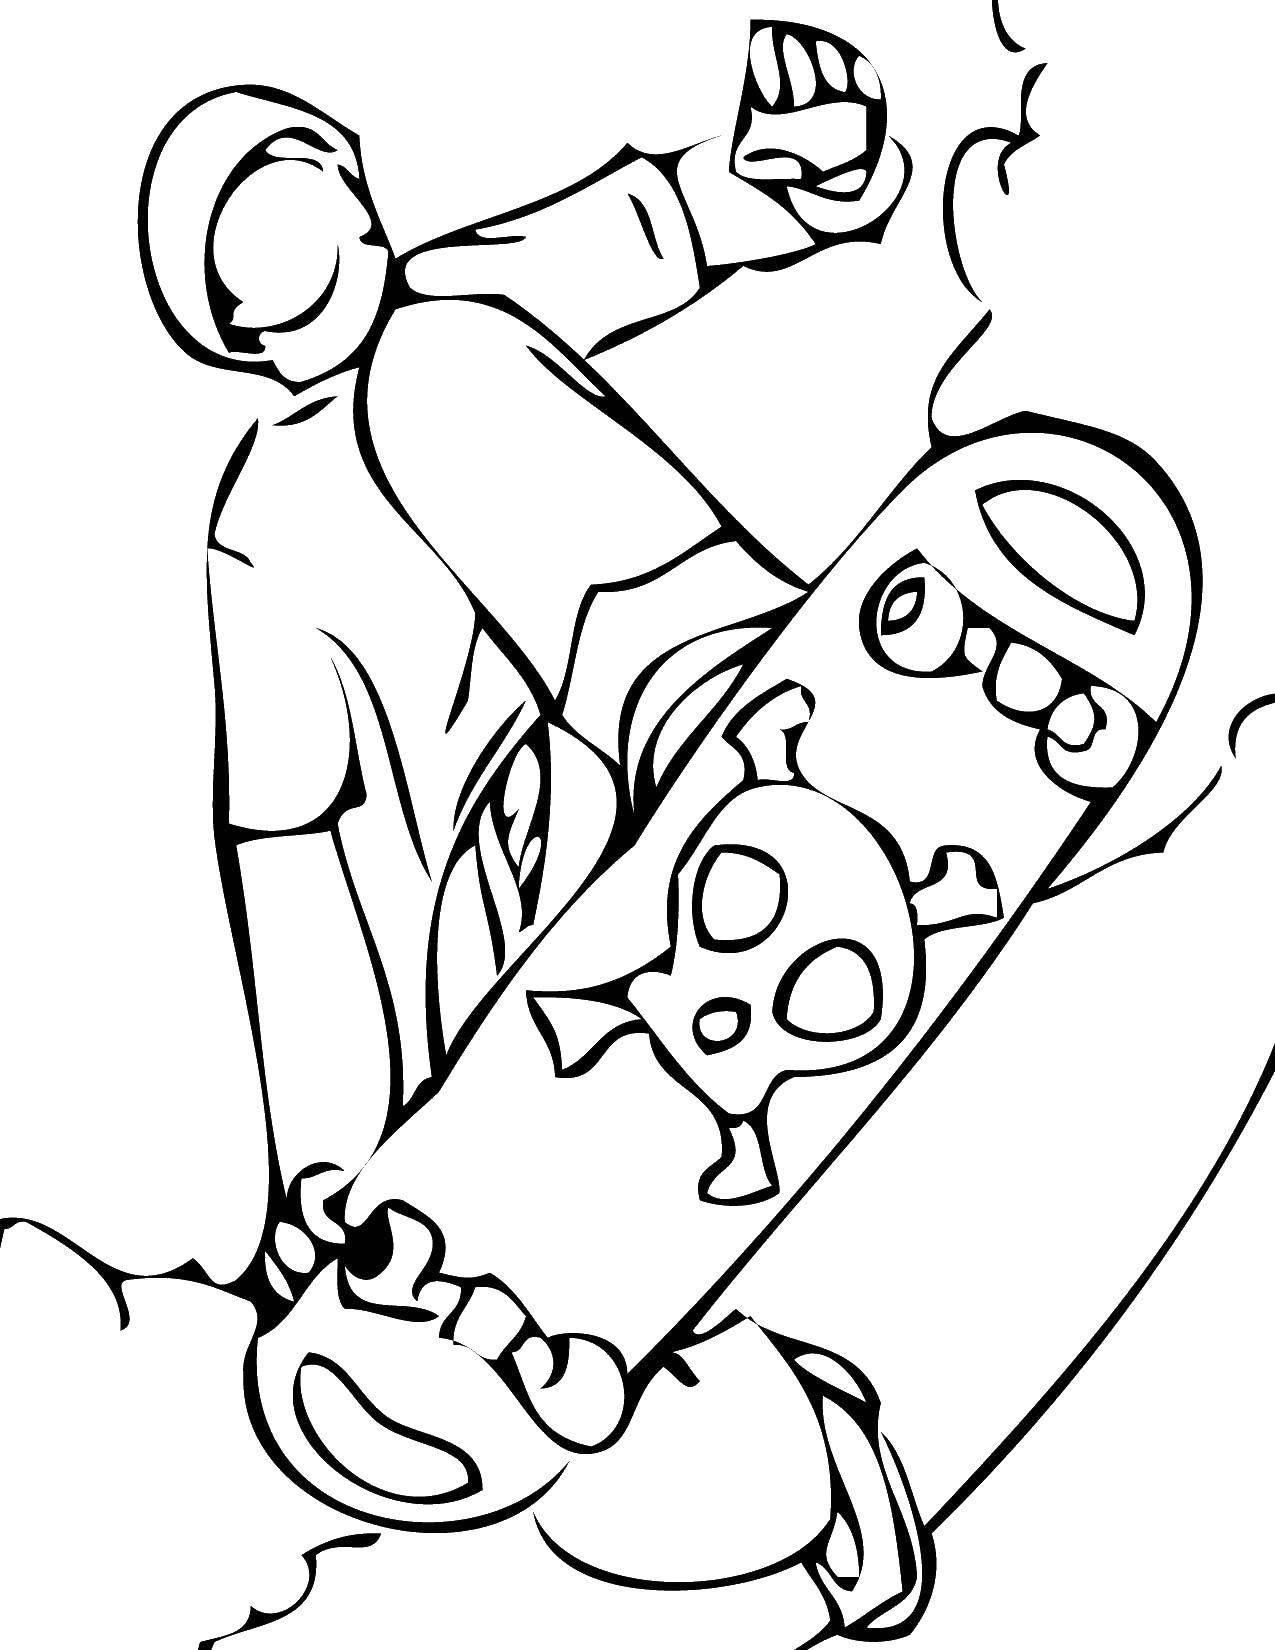 Online coloring pages Coloring page Boy riding on a skateboard For  teenagers, Download print coloring page.